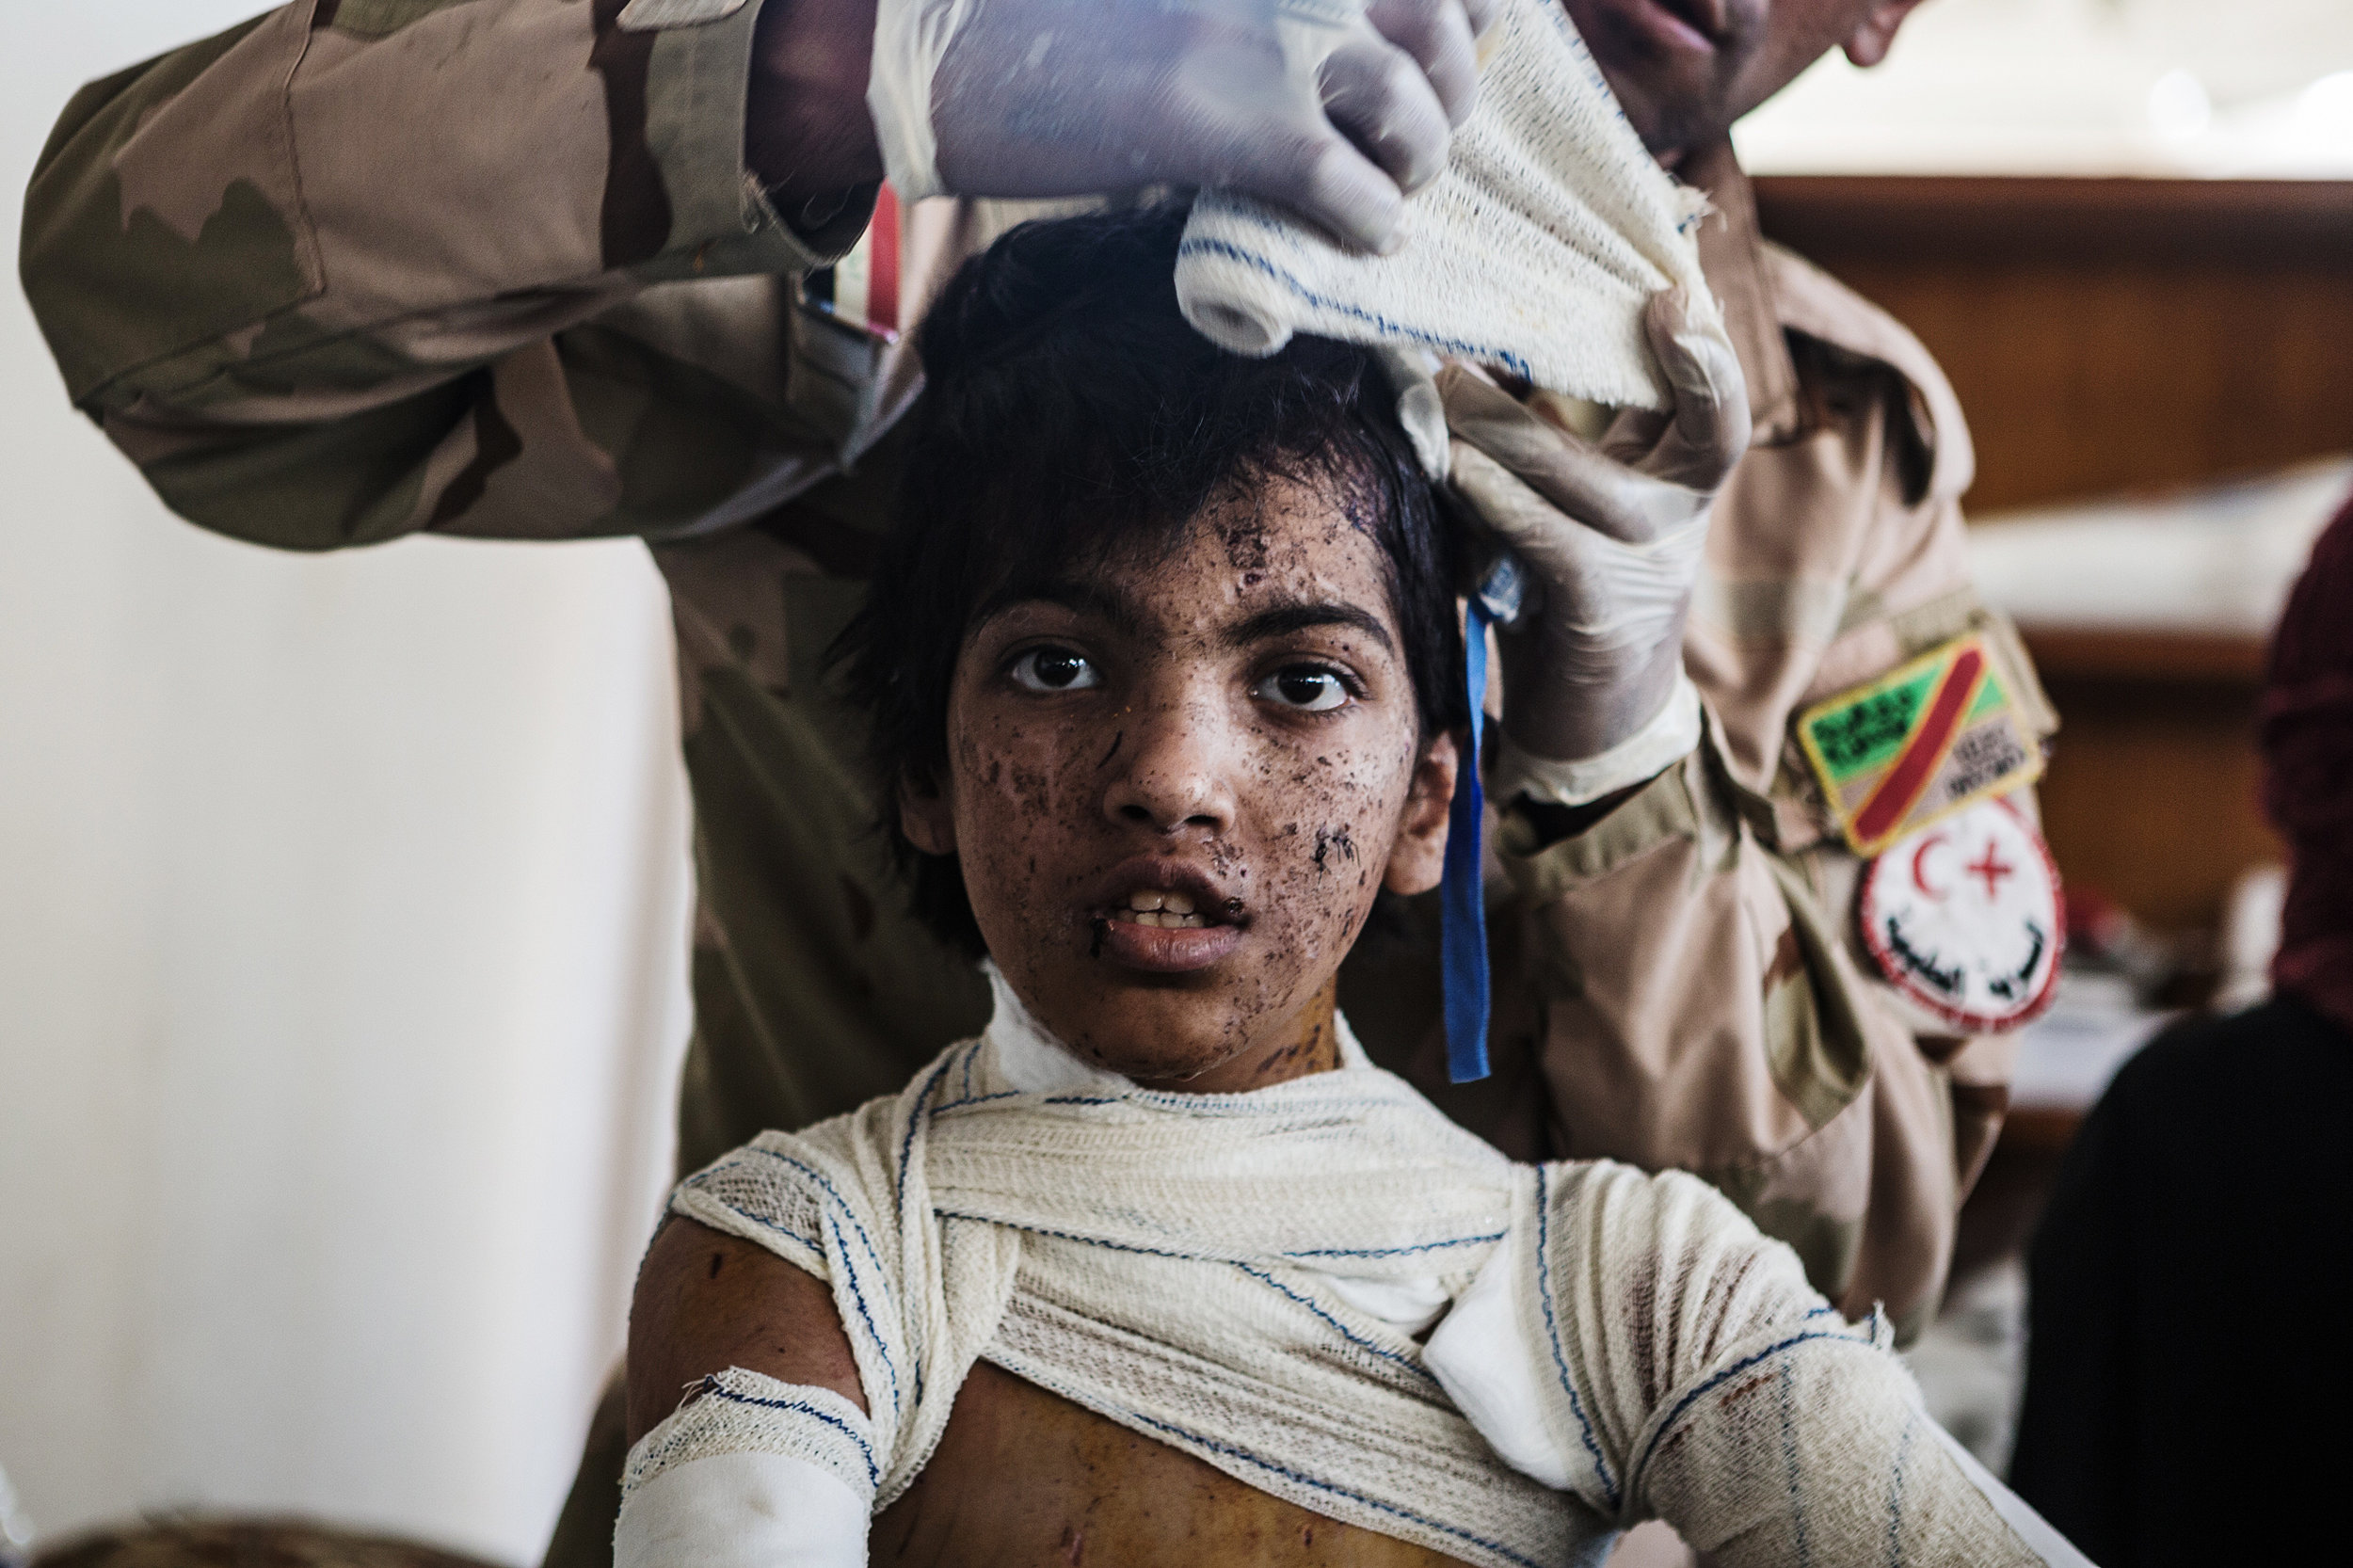  A dazed child receives medical treatment at an Iraqi army medical unit after fleeing heavy fighting in al-Zinjili neighborhood. June 03, 2017.  